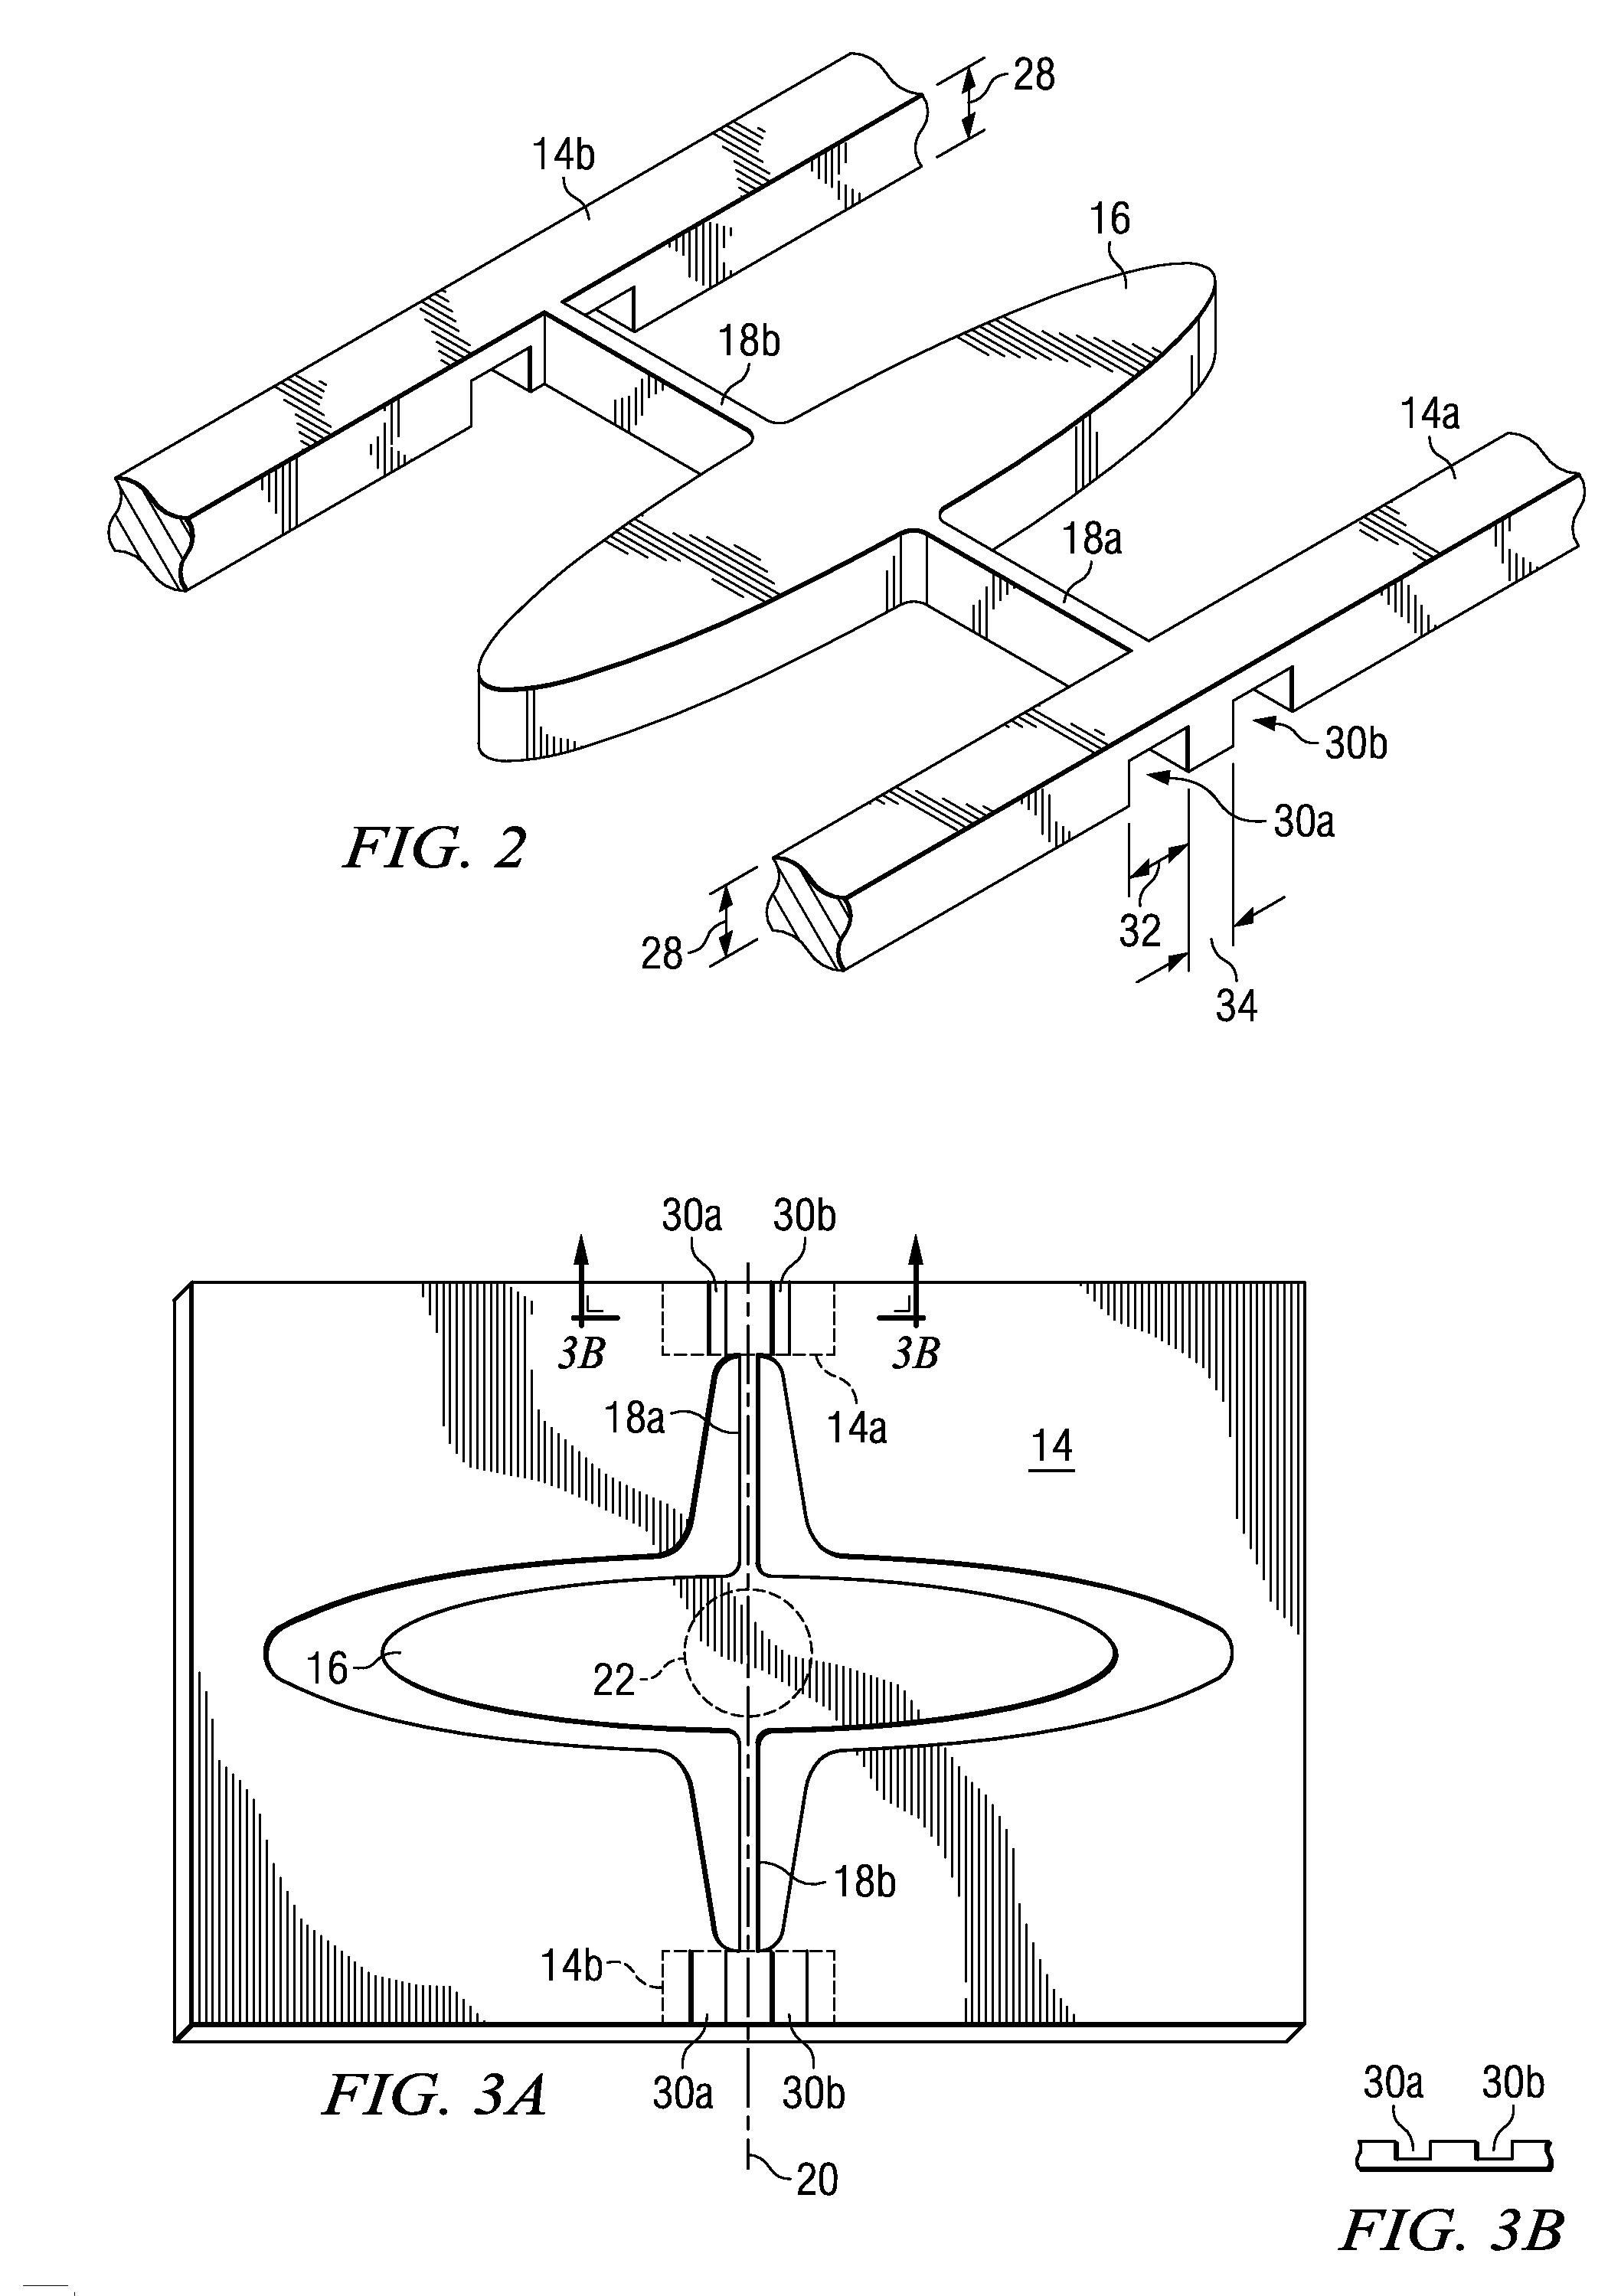 Apparatus and method for adjusting the resonant frequency of an oscillating device